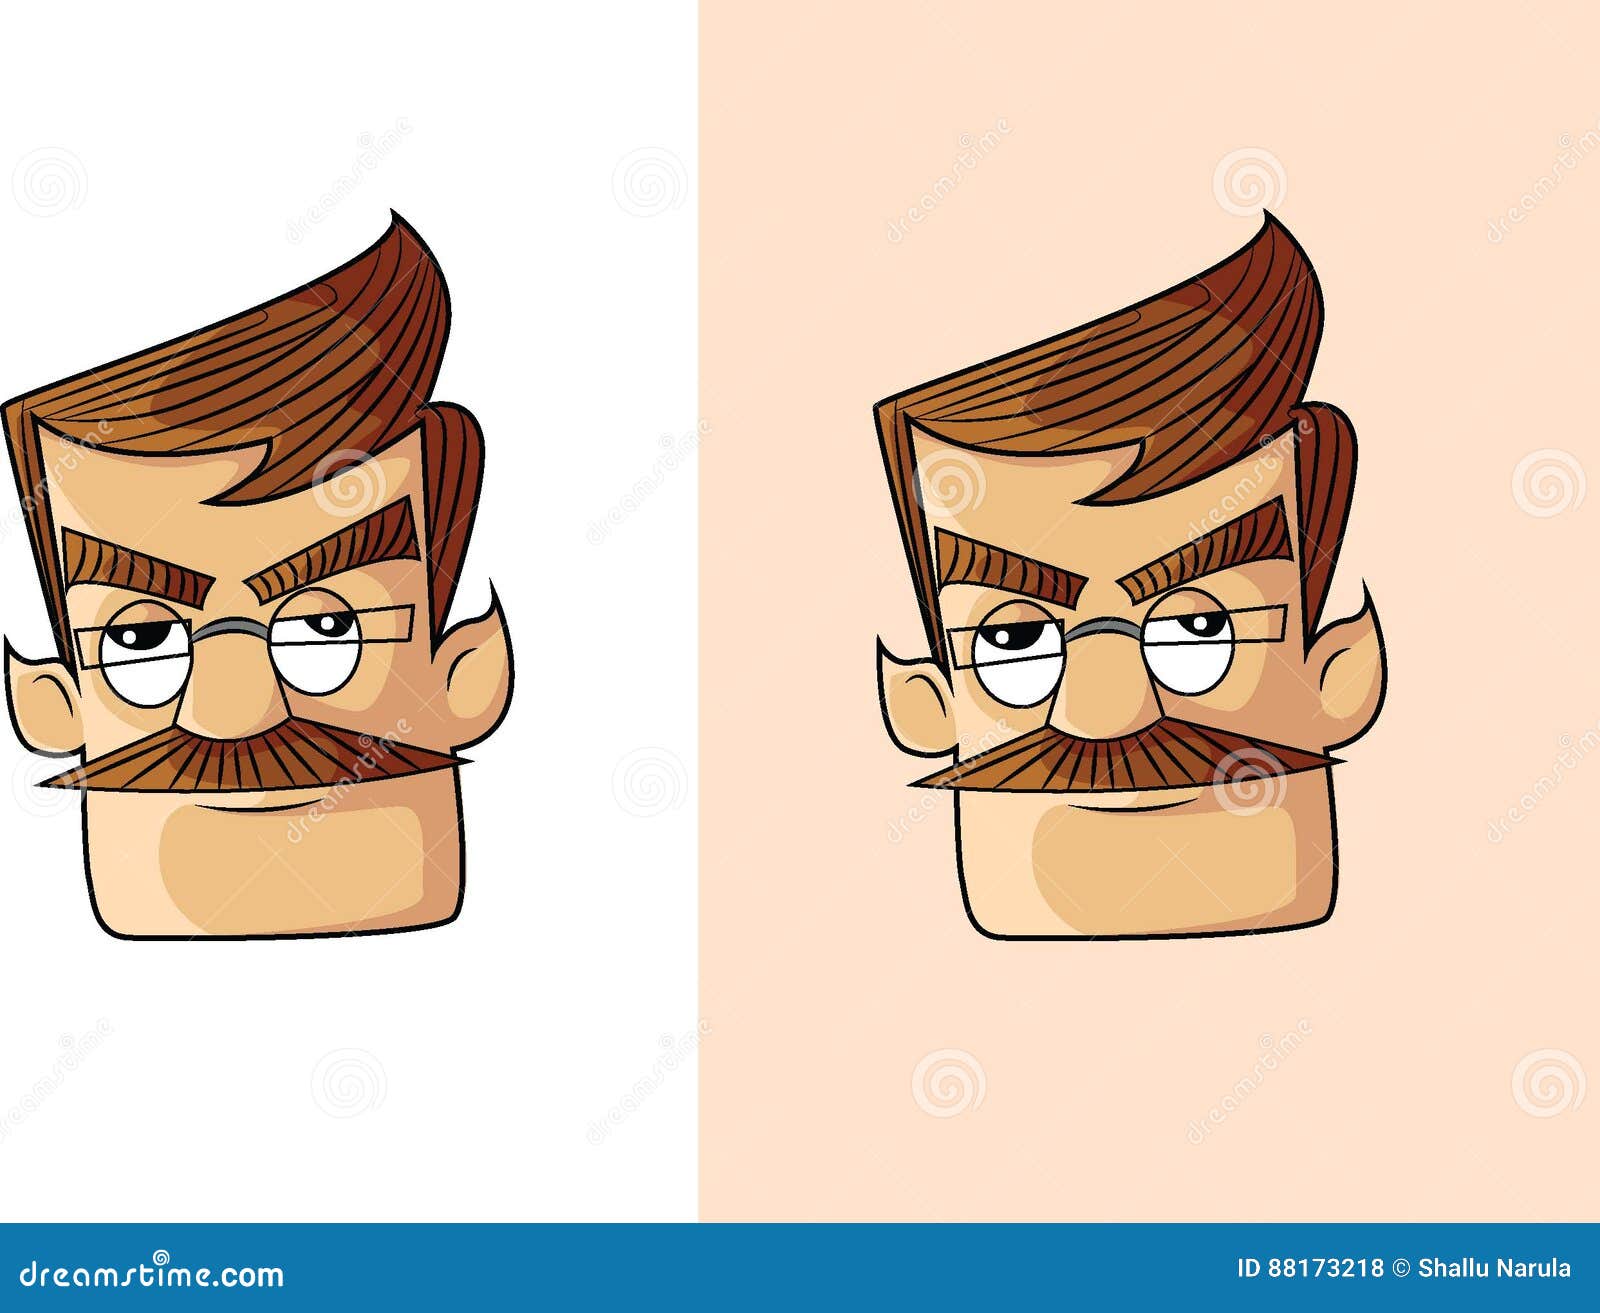 Angry Uncle Cartoon Face. stock illustration. Illustration of nose -  88173218